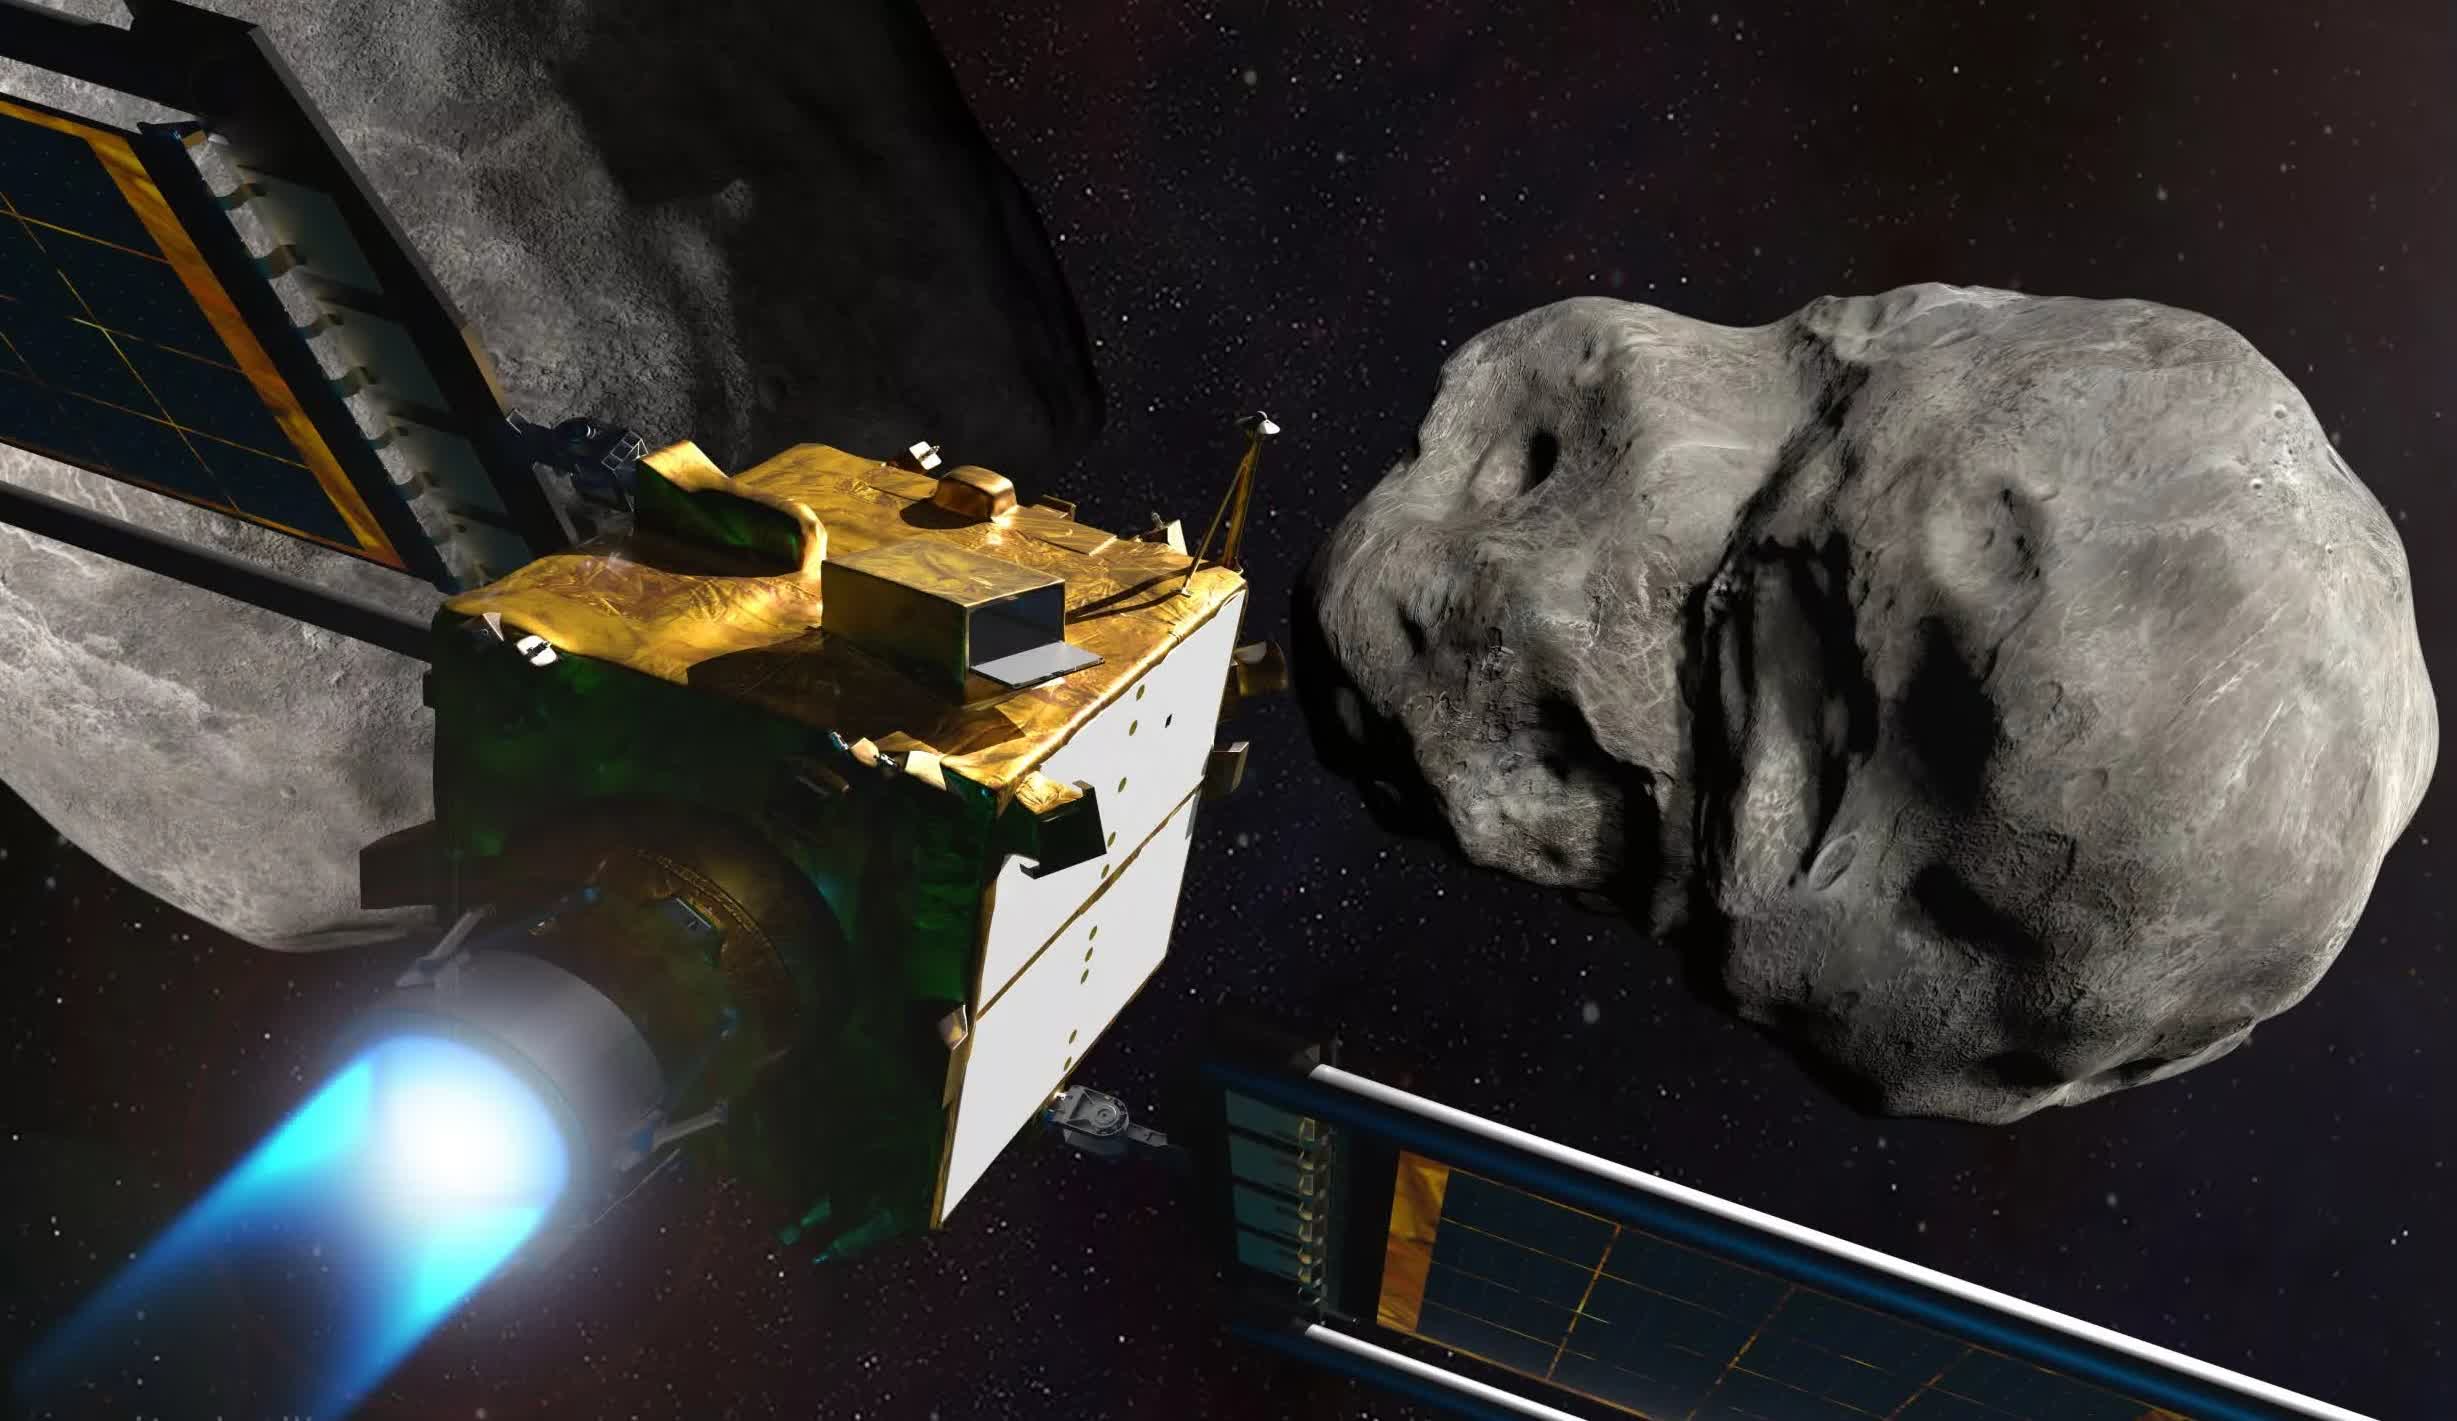 NASA: DART mission altered asteroid's orbit by 32 minutes